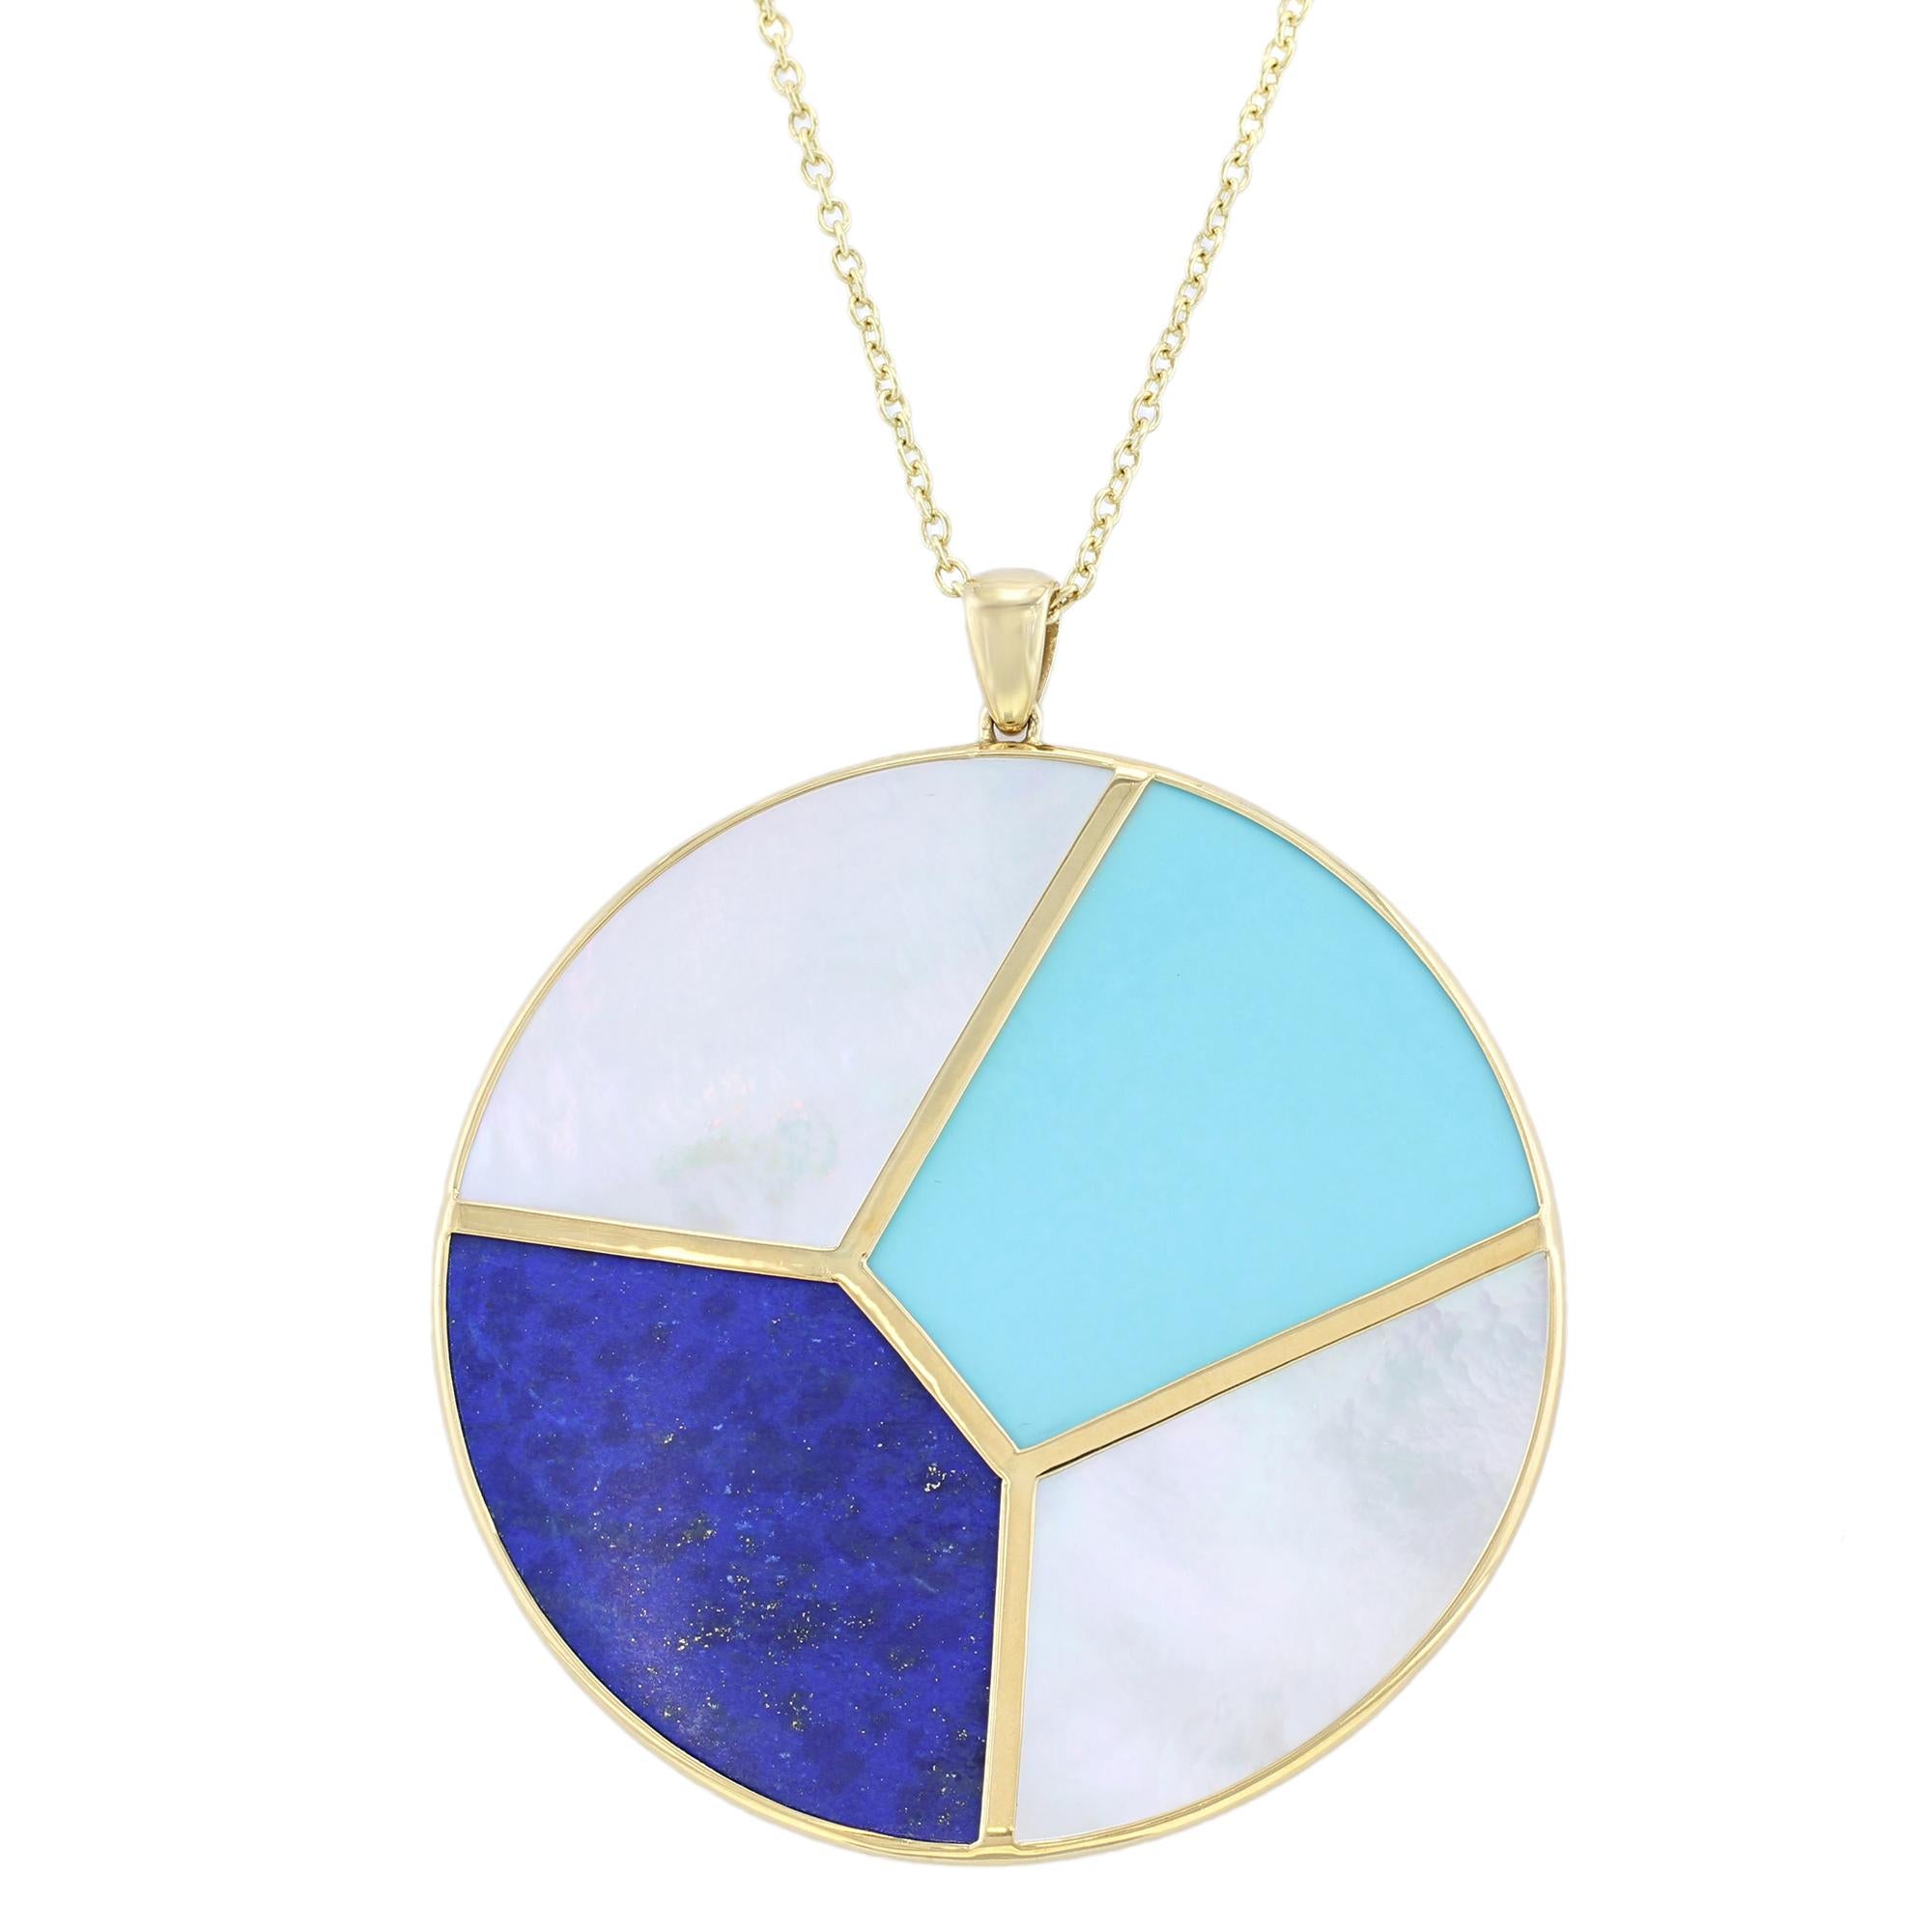 The history of mosaic goes back thousands of years, but we've never seen the ancient art form look more modern than in this multi-stone Ippolita necklace.
Made in 18K Gold Polished Rock Candy Mosaic Large Round Pendant Necklace in Viareggio is a